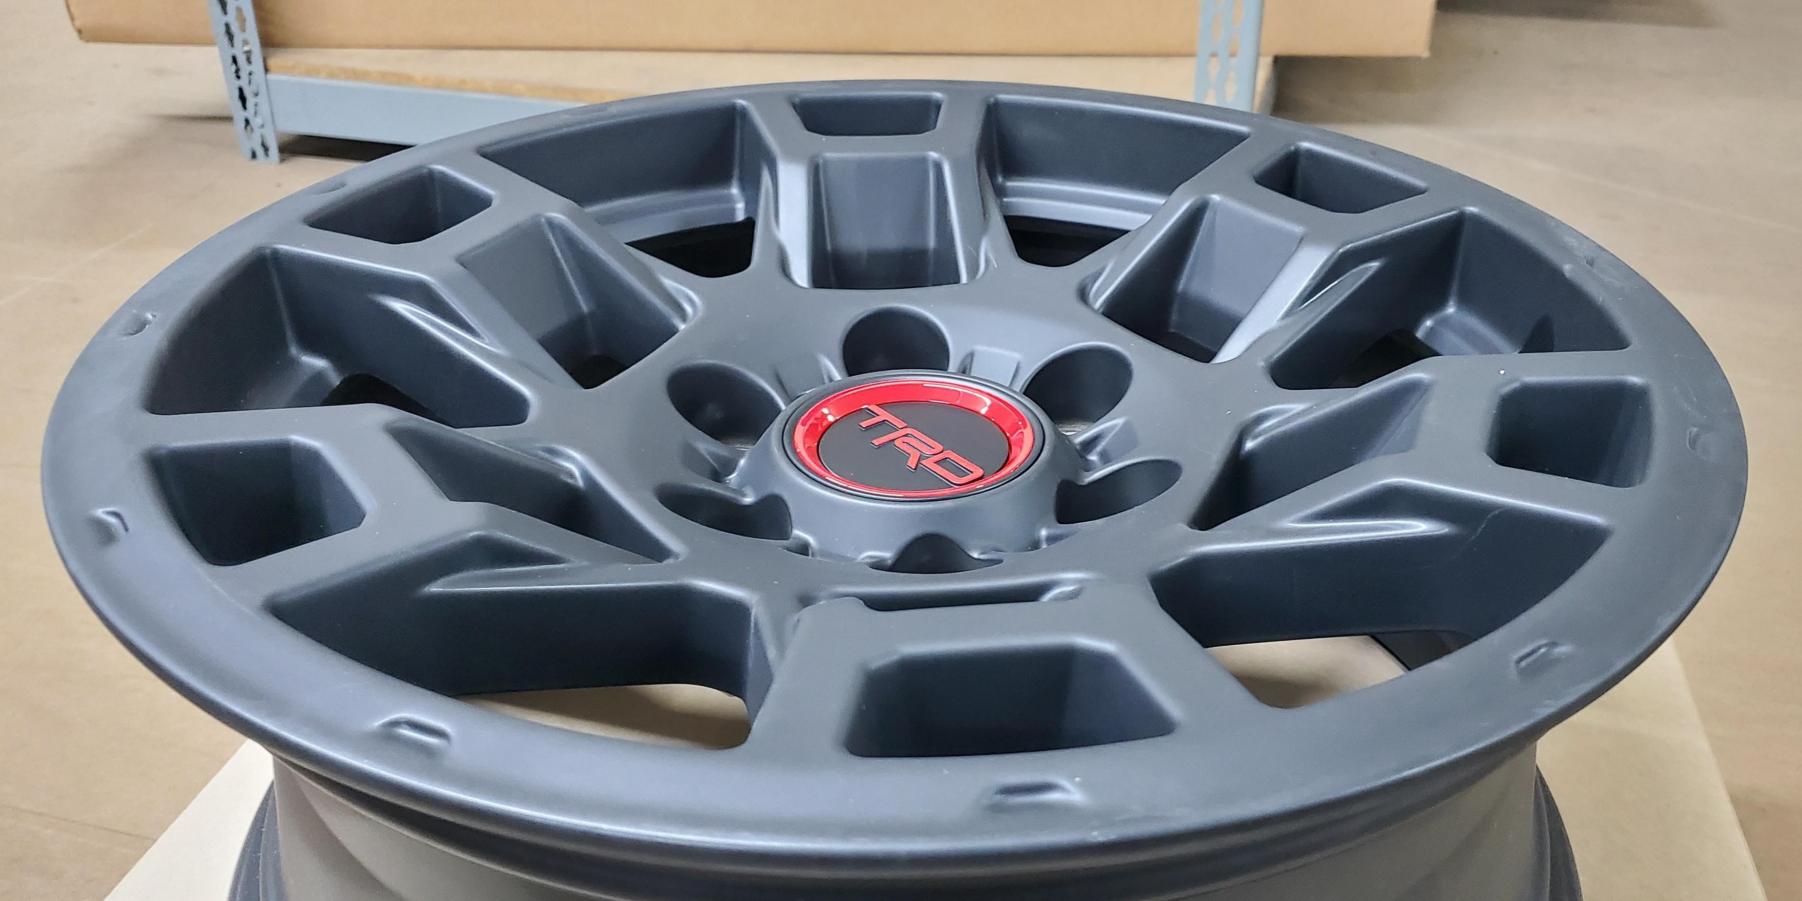 Pictures of the new 2021 trd pro wheels-6-jpg